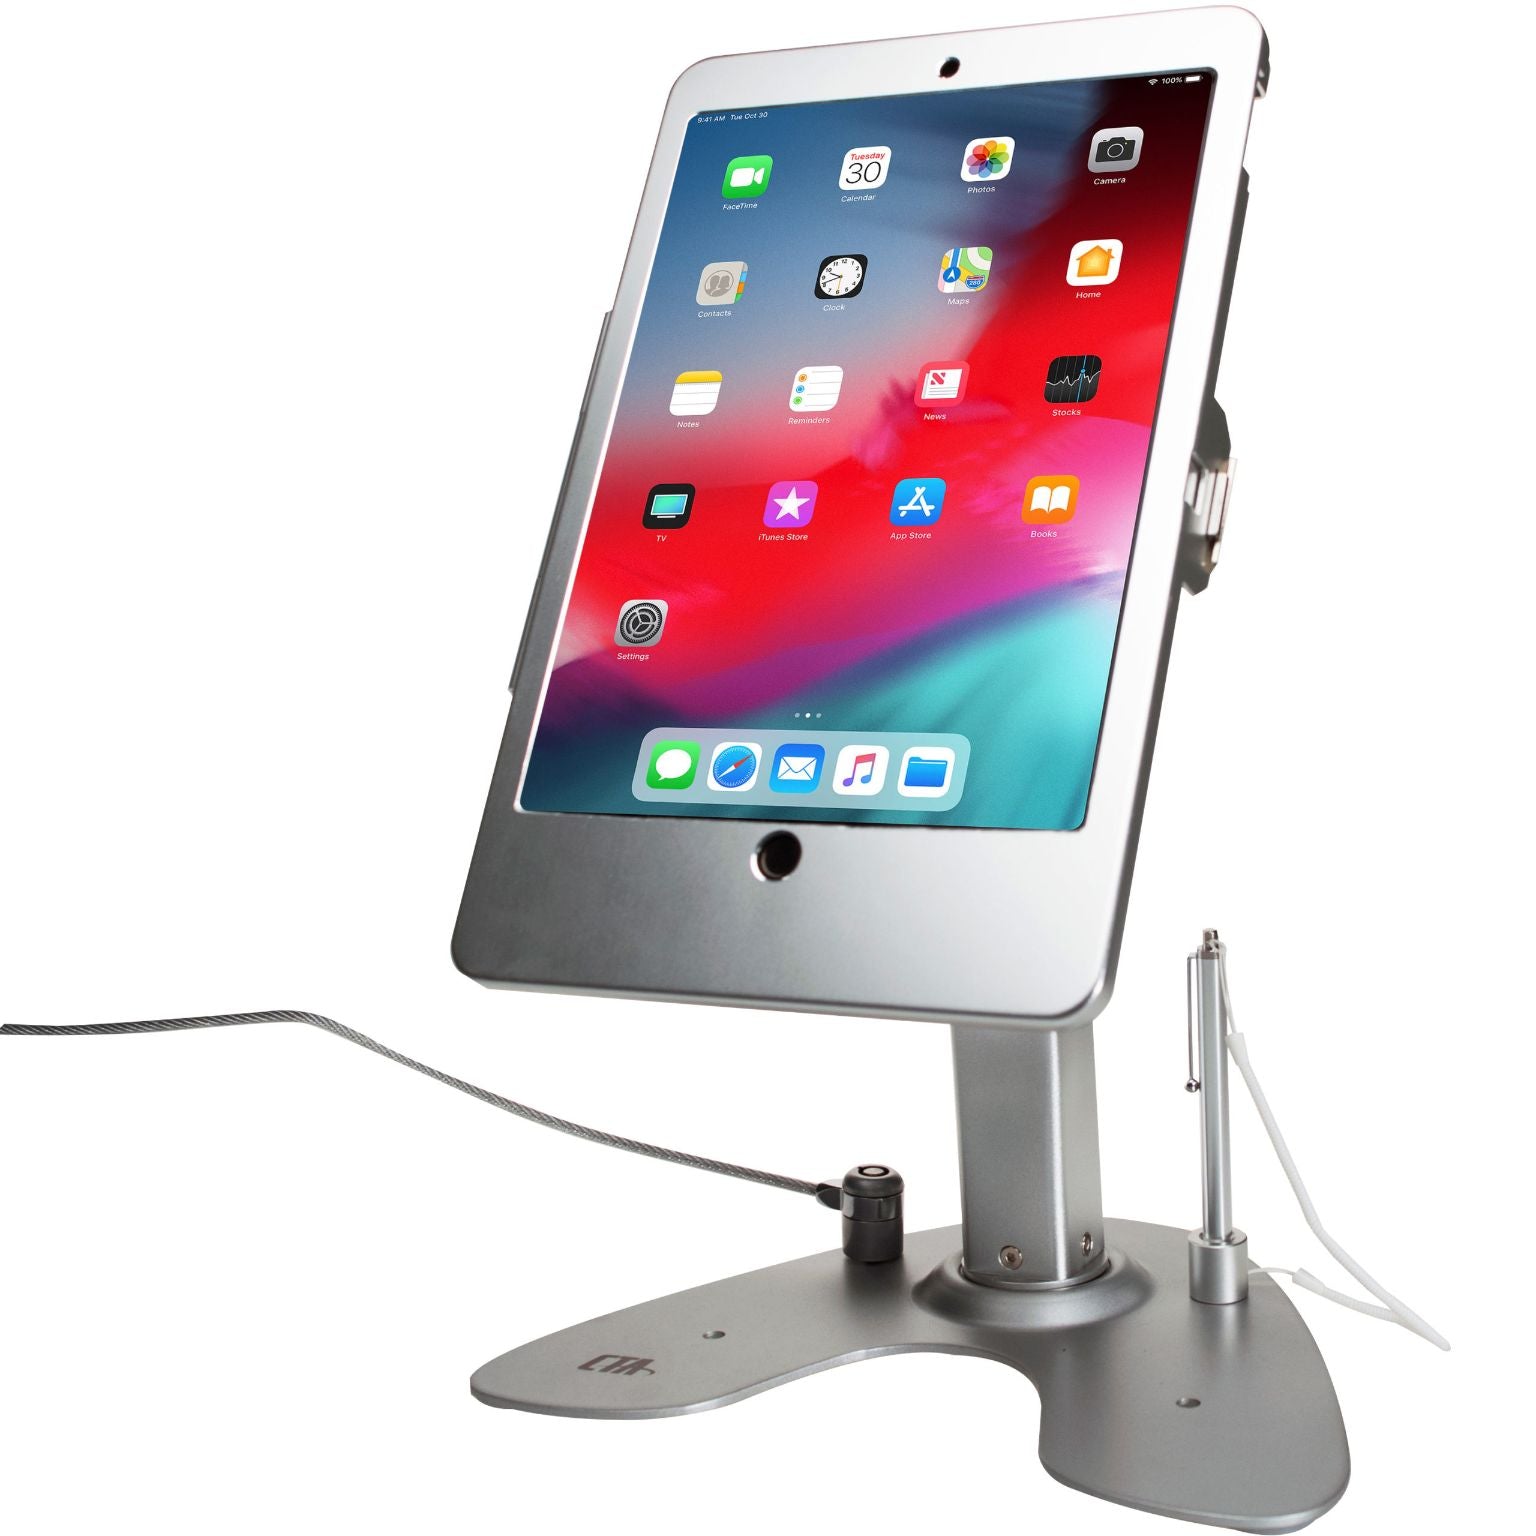 Dual Security Kiosk Stand with Locking Case and Cable for iPad Pro 10.5 and iPad Air Gen. 3